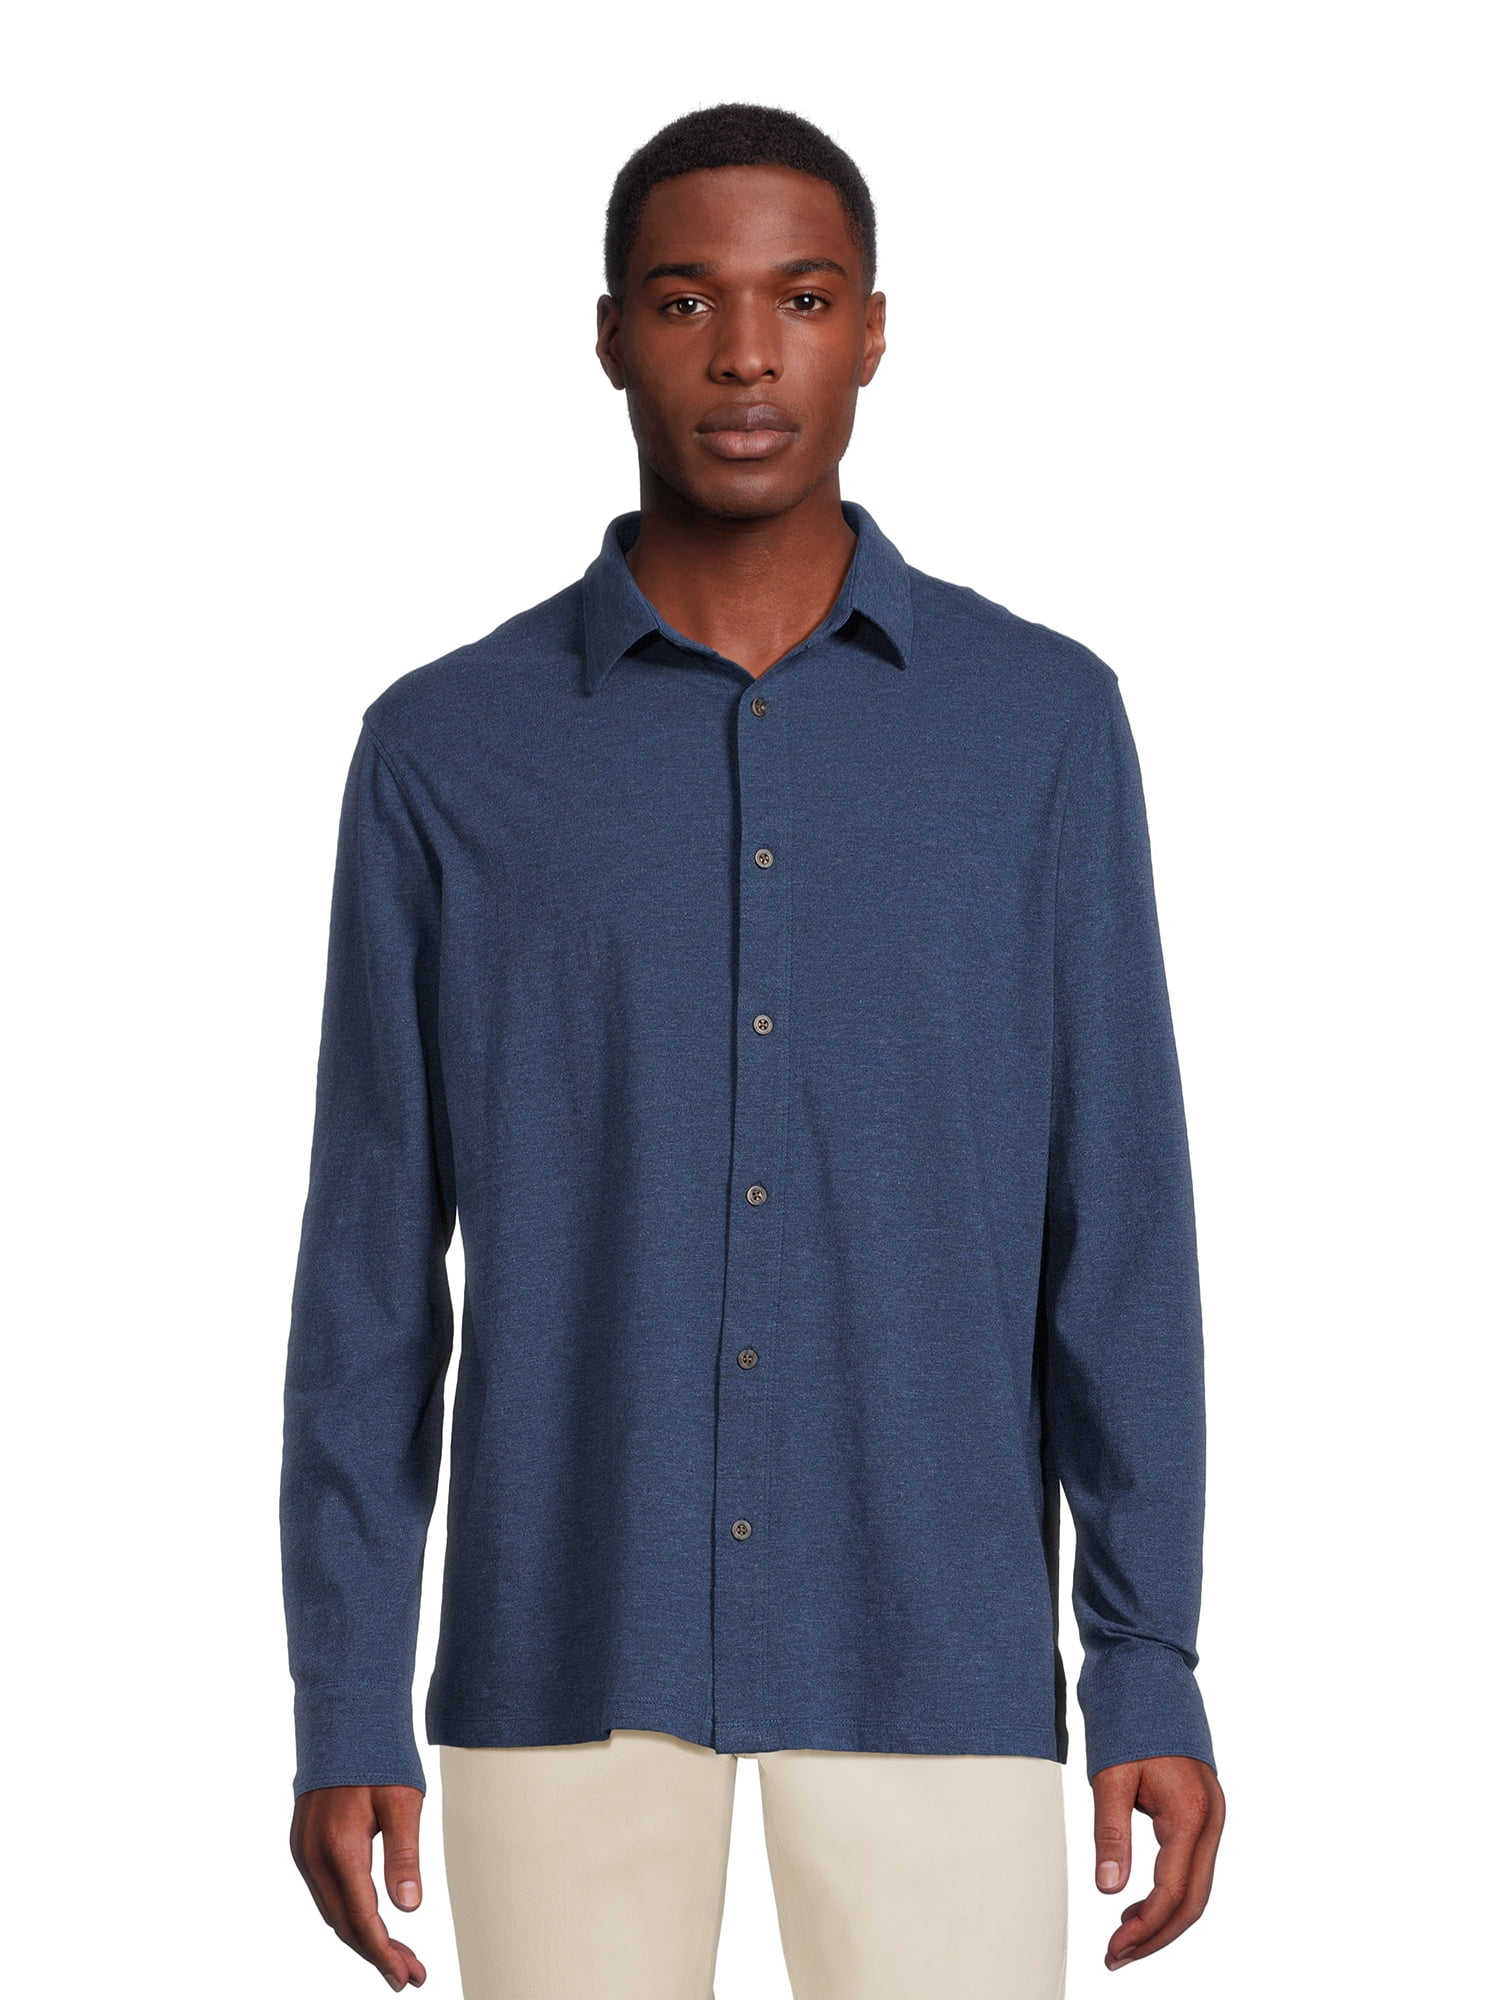 George Men's Knit Button Down Shirt with Long Sleeves, Sizes S-3XL